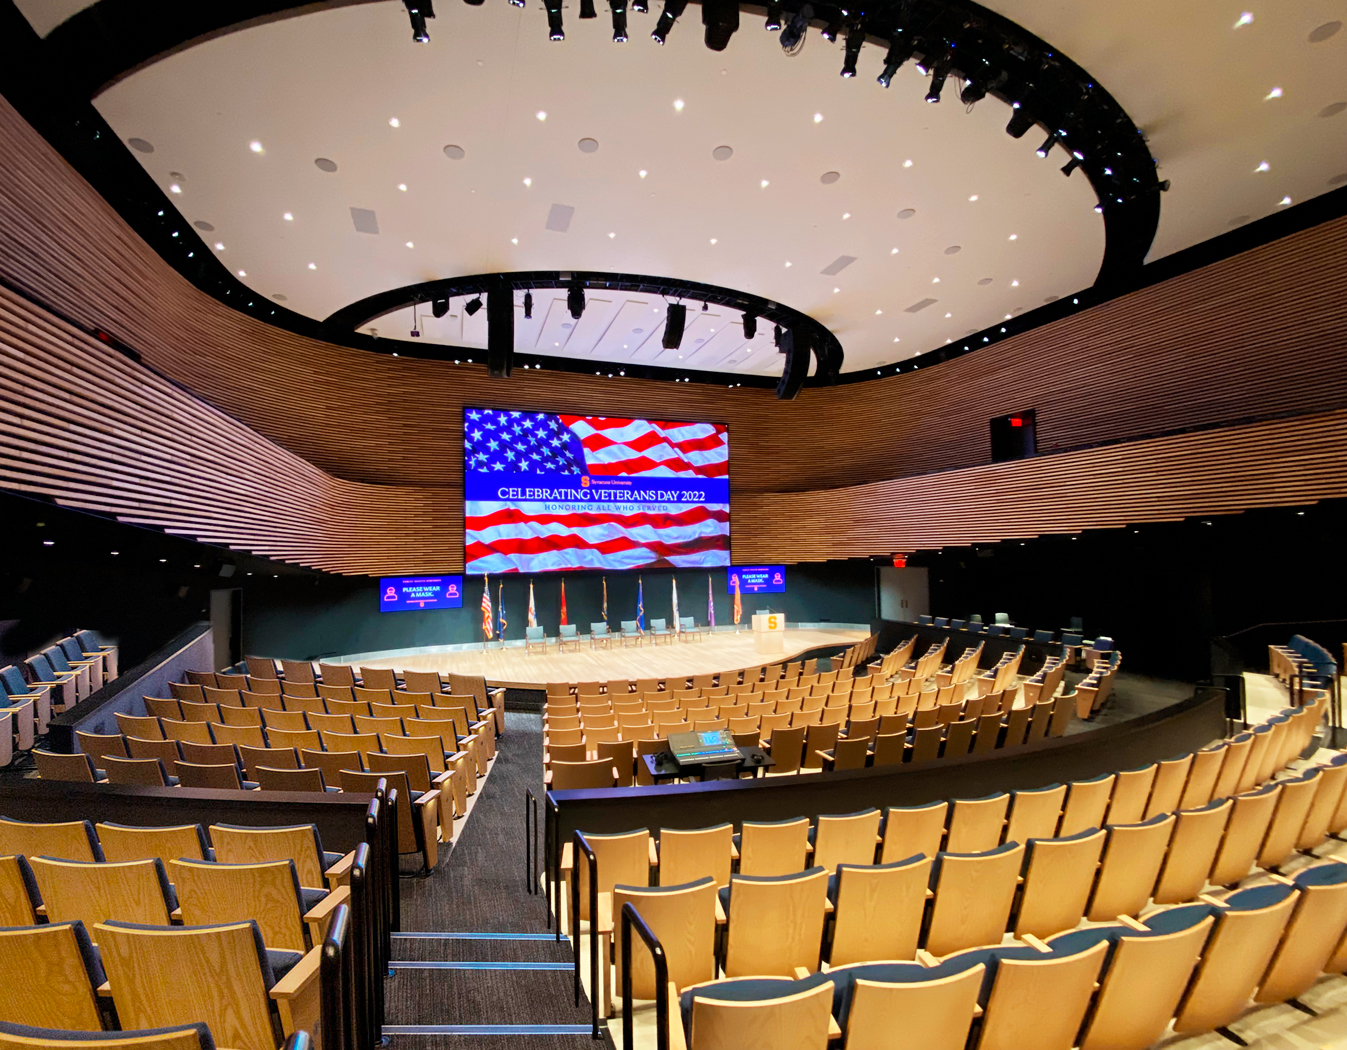 Thumbnail - The K. G. Tan Auditorium at the Syracuse University National Veterans Resource Center is designed to be a hub for Central New York. It hosts lectures, community activities, and national convening events and conferences.